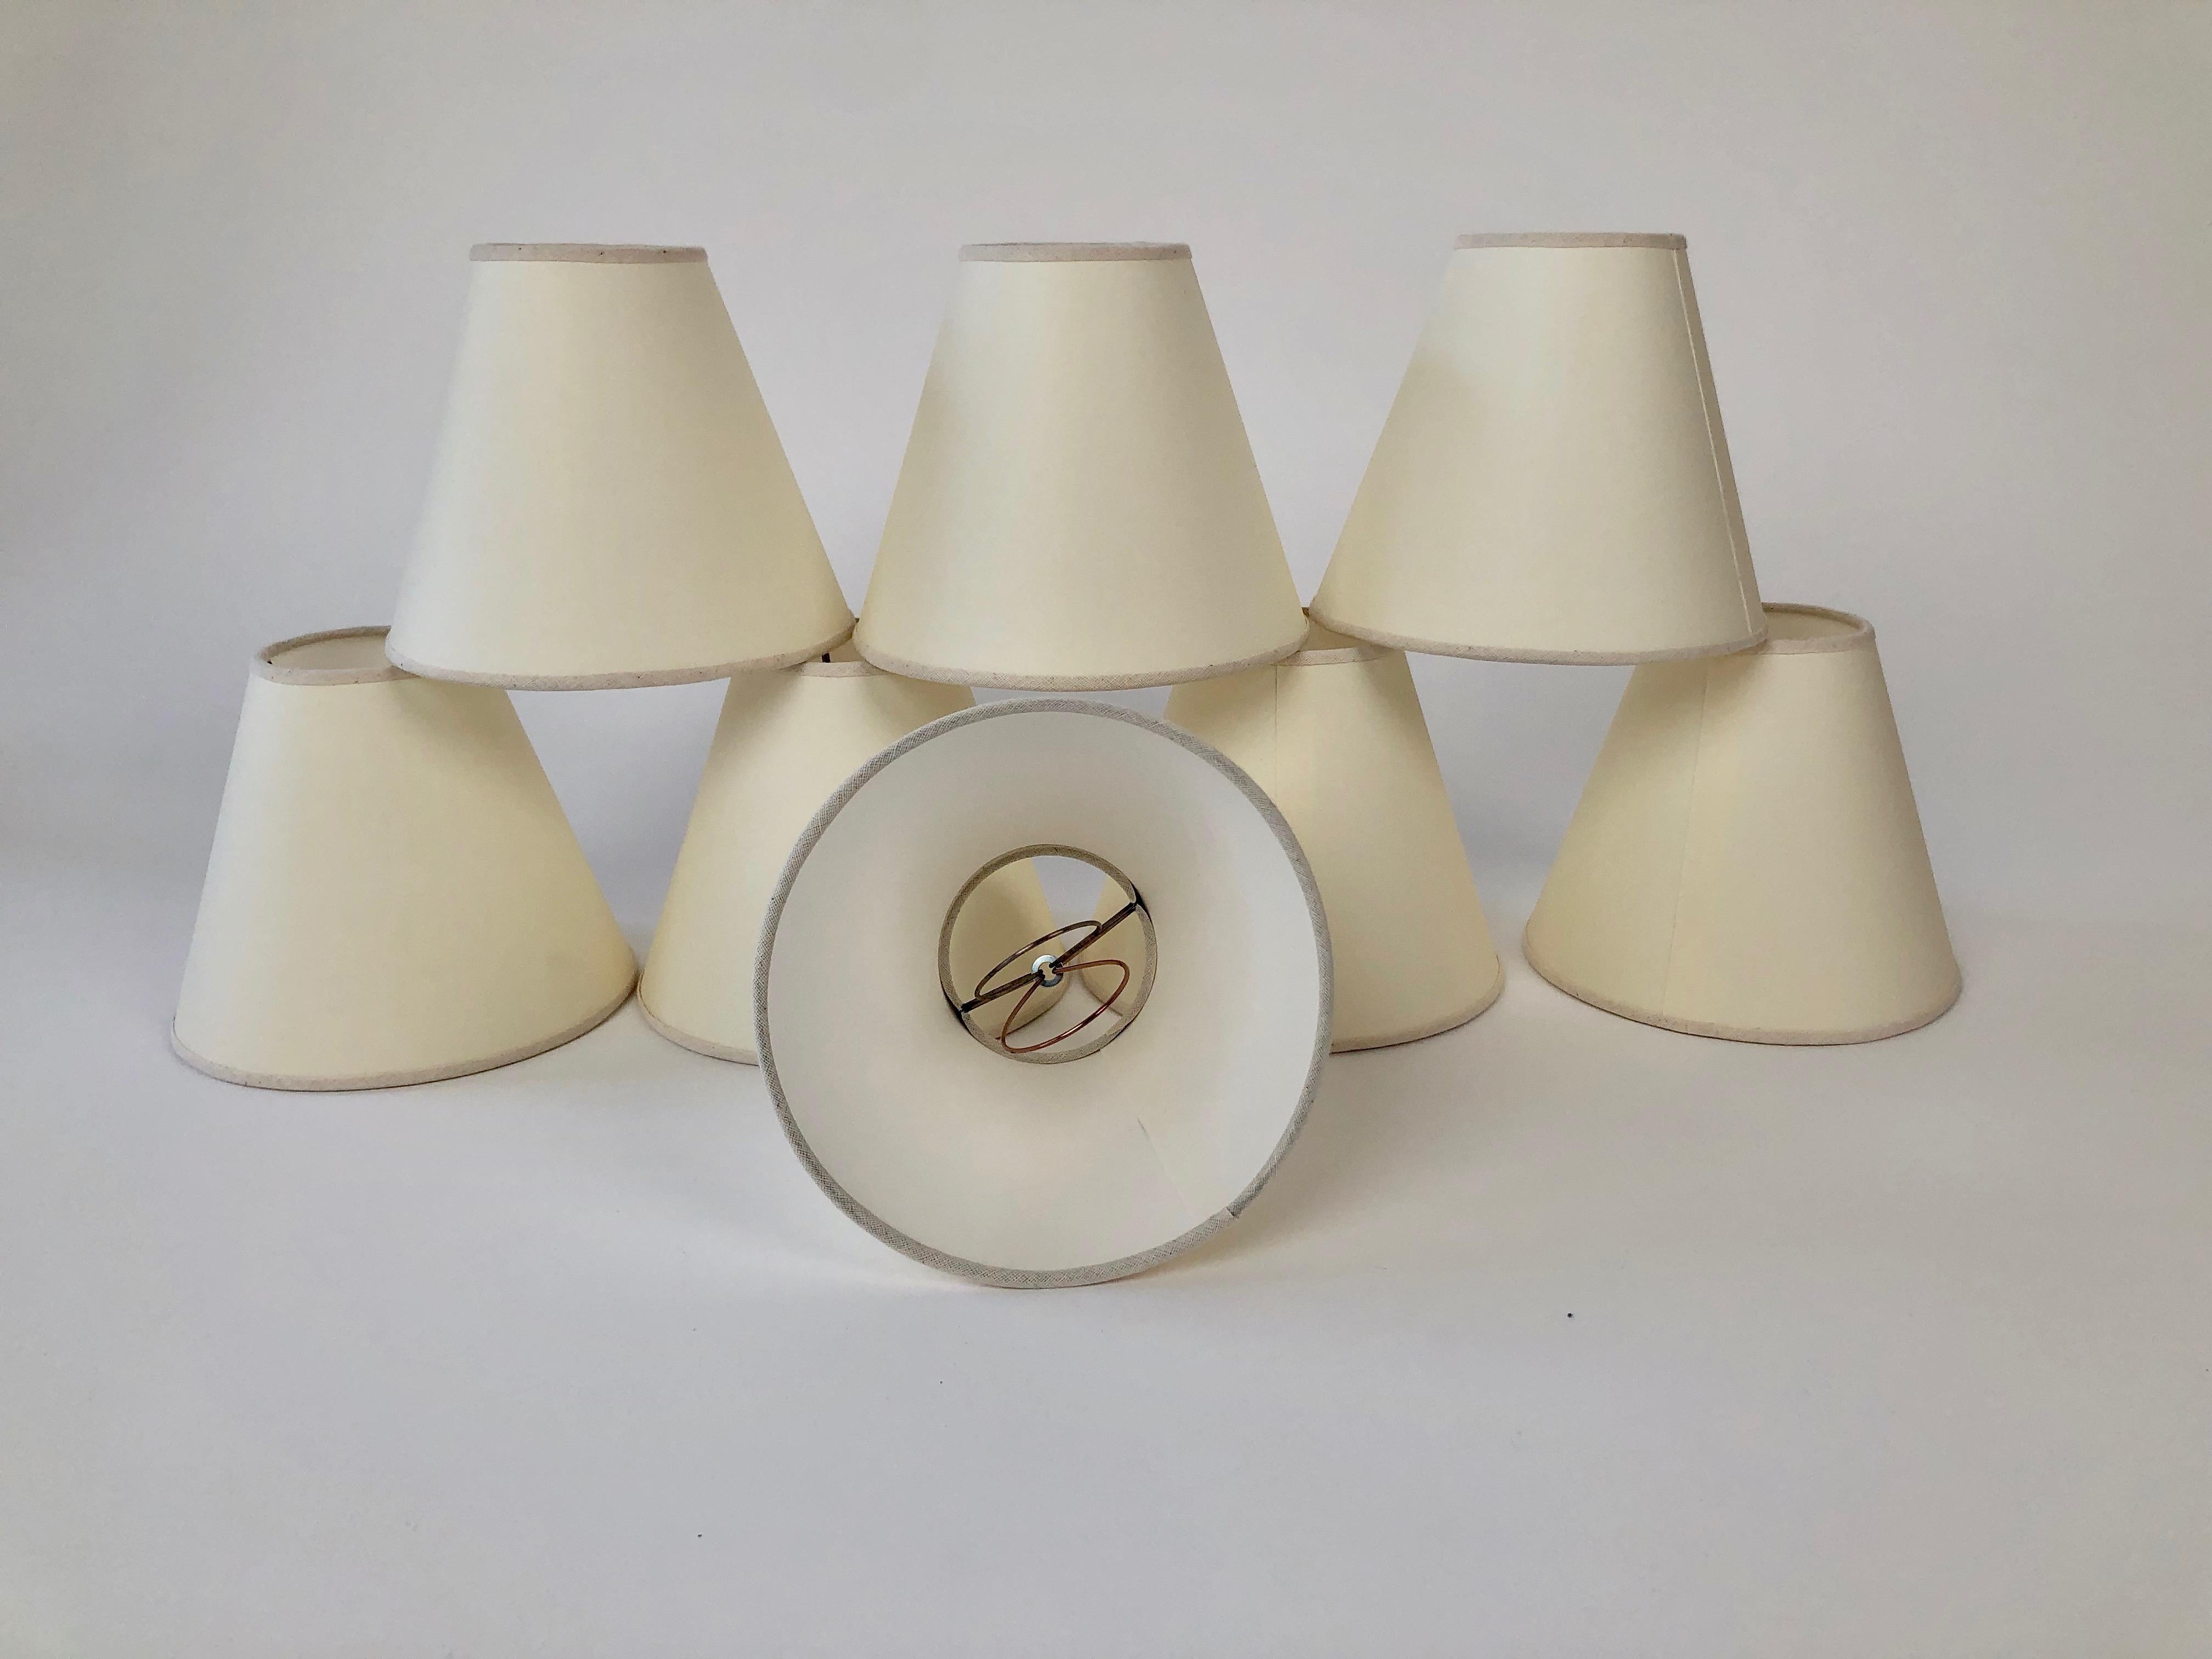 Modern Eight Arm Chandelier from Austria with Parchment Shades, 1950's For Sale 5